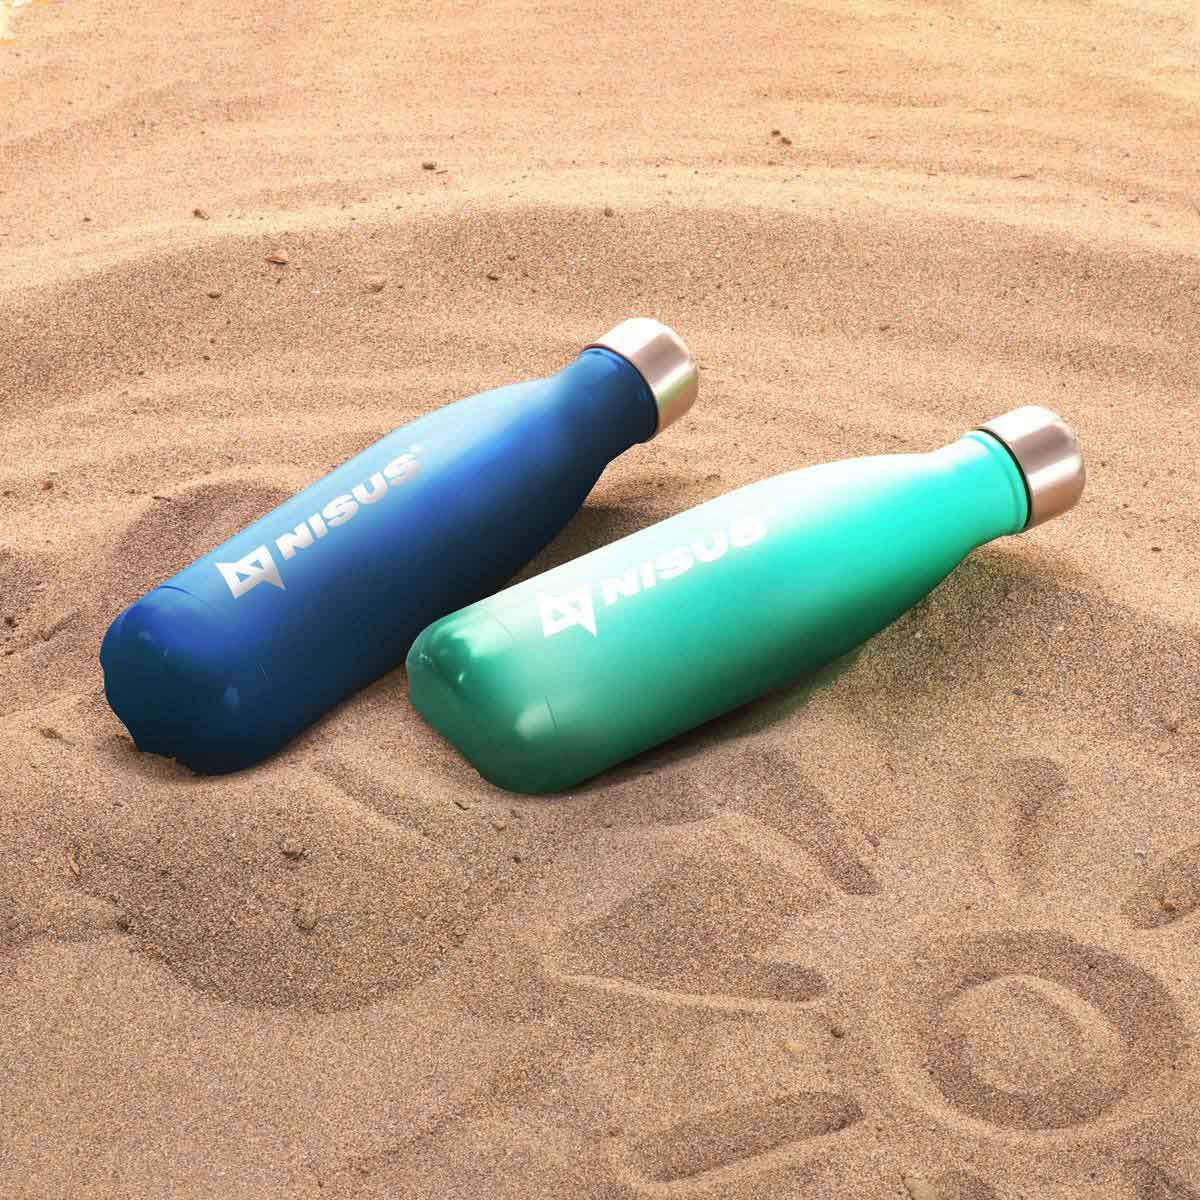 A couple of 17 oz stainless steel water bottles, blue and turquoise, lying on the sand